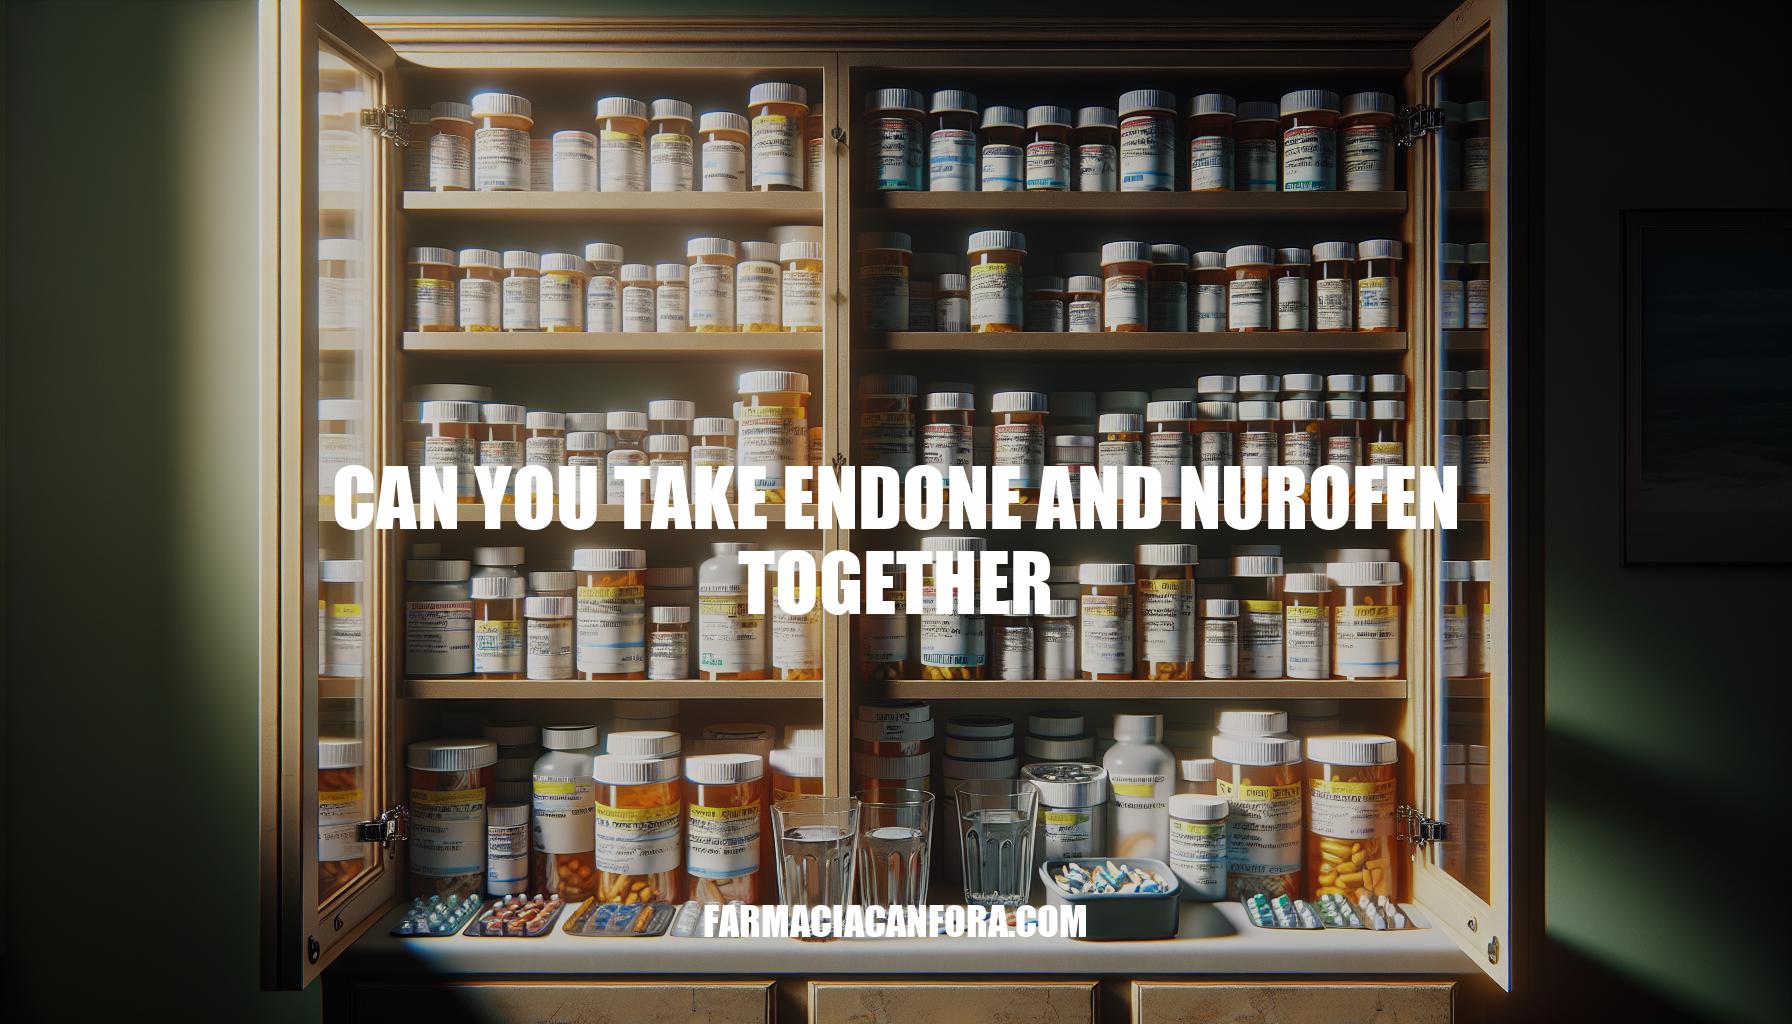 Can You Take Endone and Nurofen Together: Risks, Safety, and Recommendations